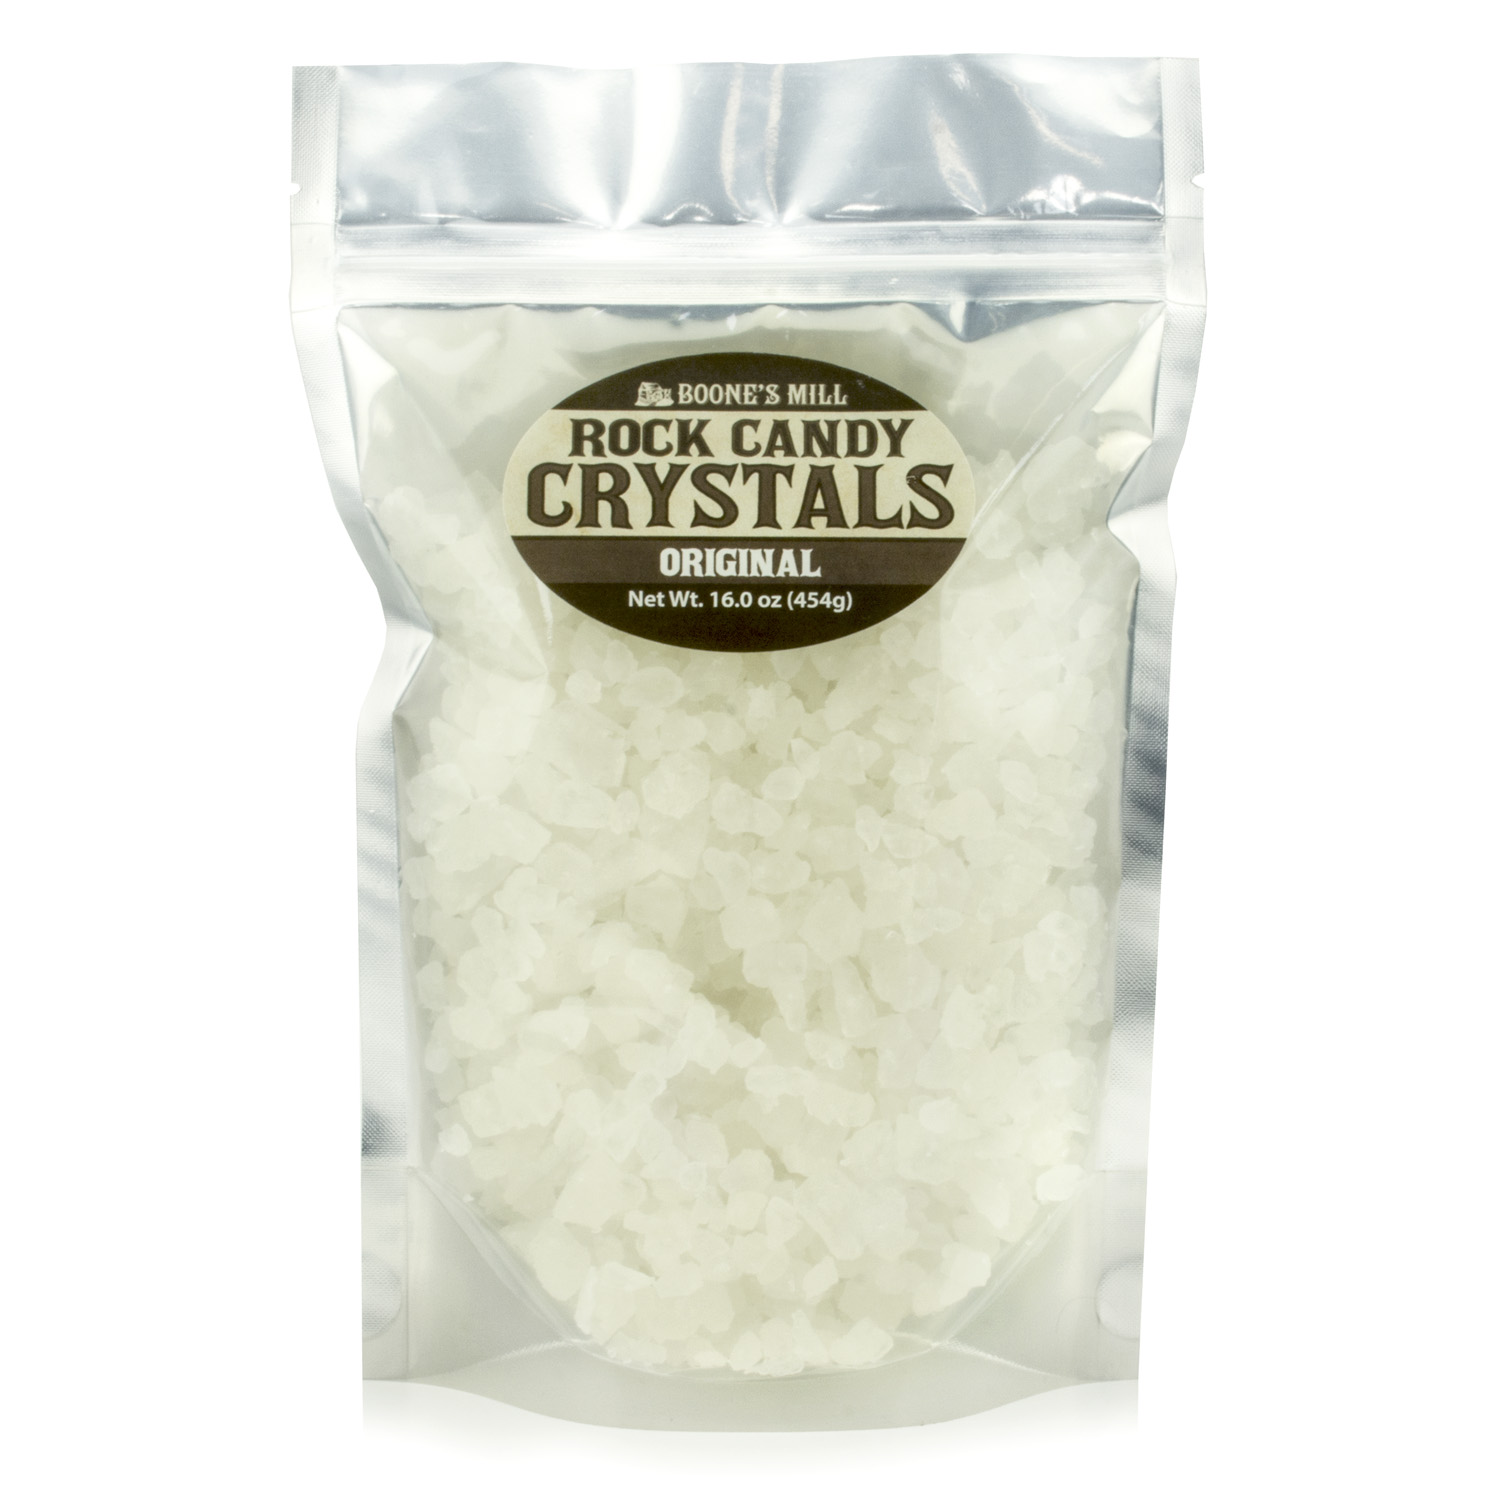 Rock Candy Crystals Original Flavor White Clear Crystals